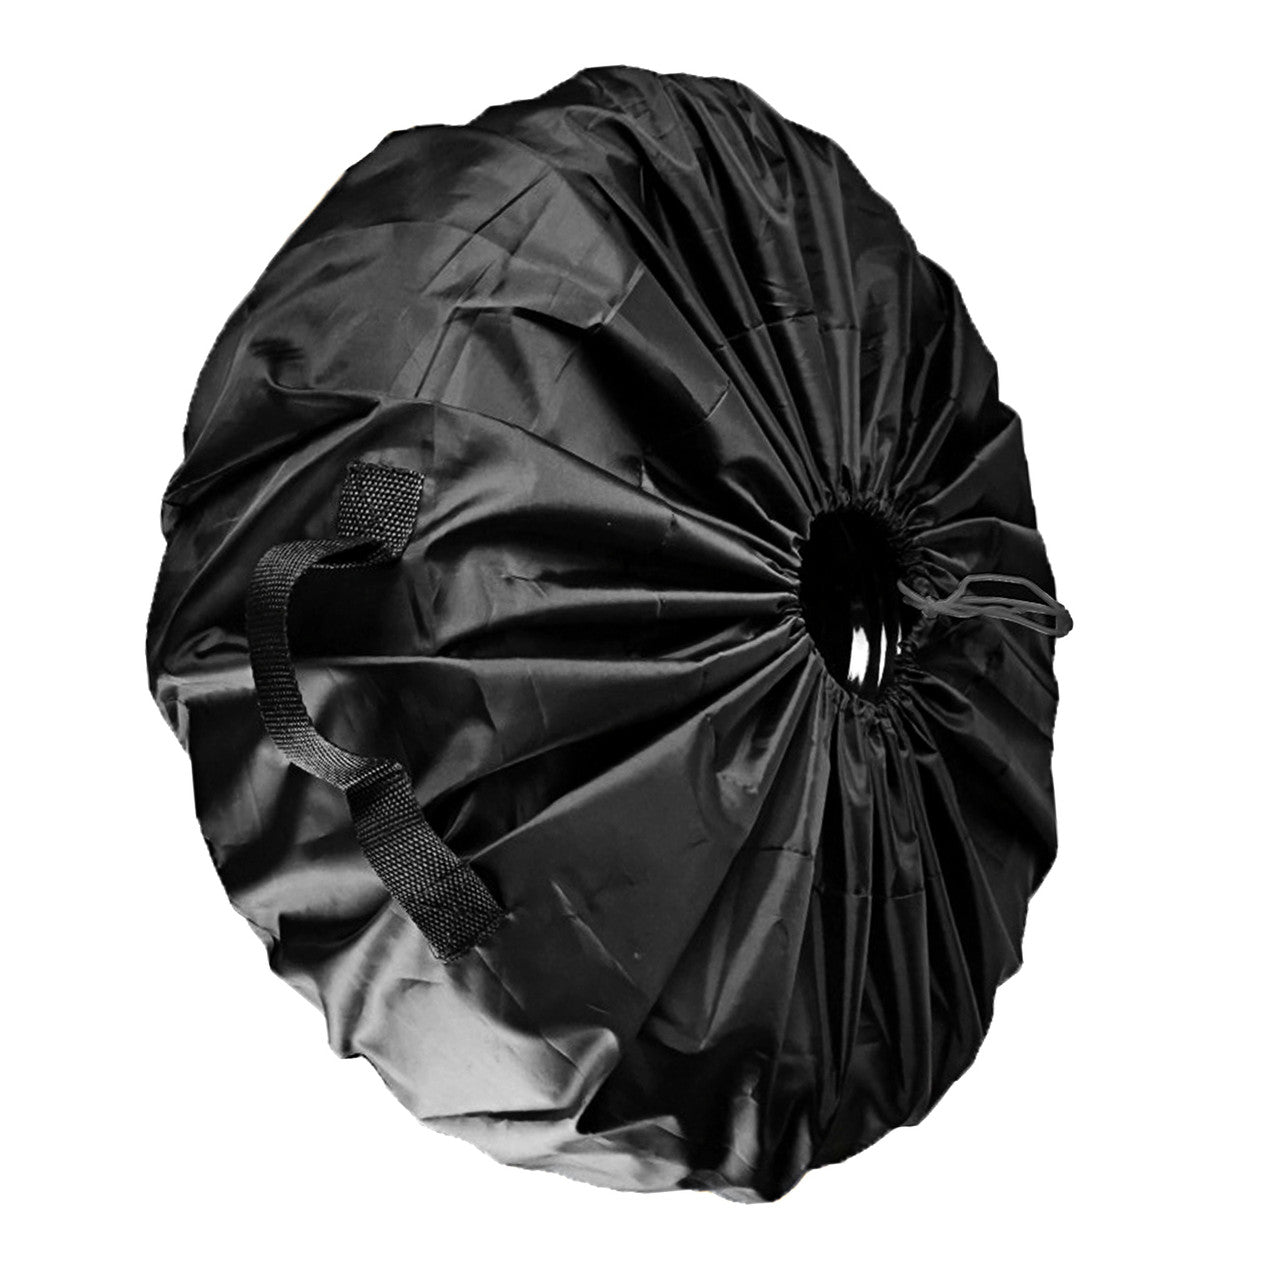 31.5 to 18.5 inch Spare Tire Cover Fit for Jeep, Trailer, RV, SUV, Truck, Tough Tire Wheel Soft Cover, Black Fits Entire Wheel size (31.5 to 18.5 inch)